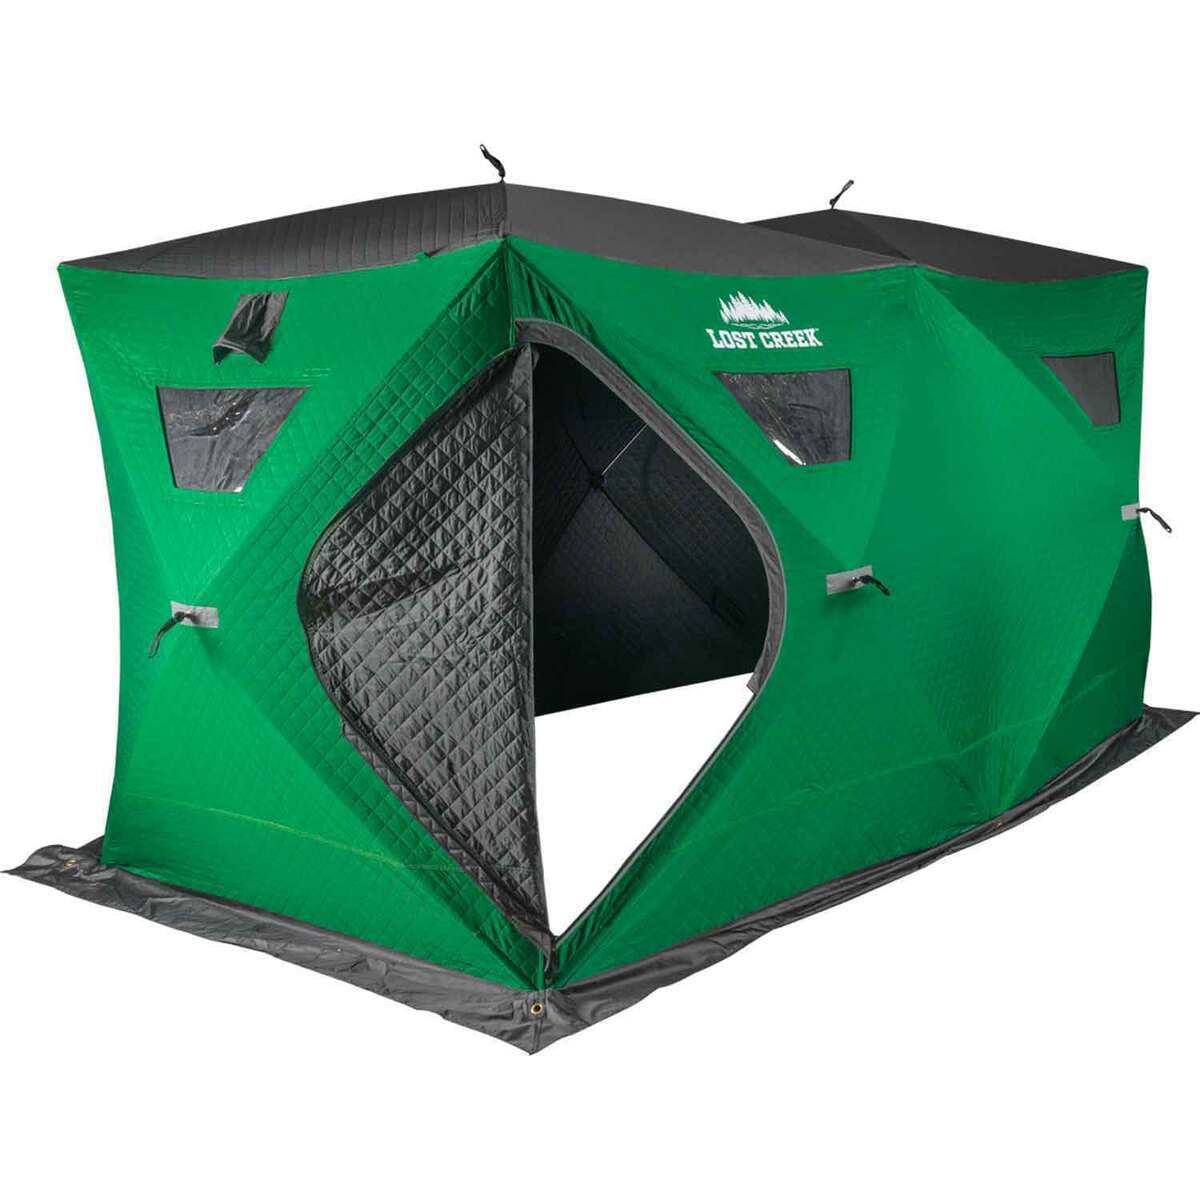 Ice Fishing Shelters for sale in Syracuse, New York